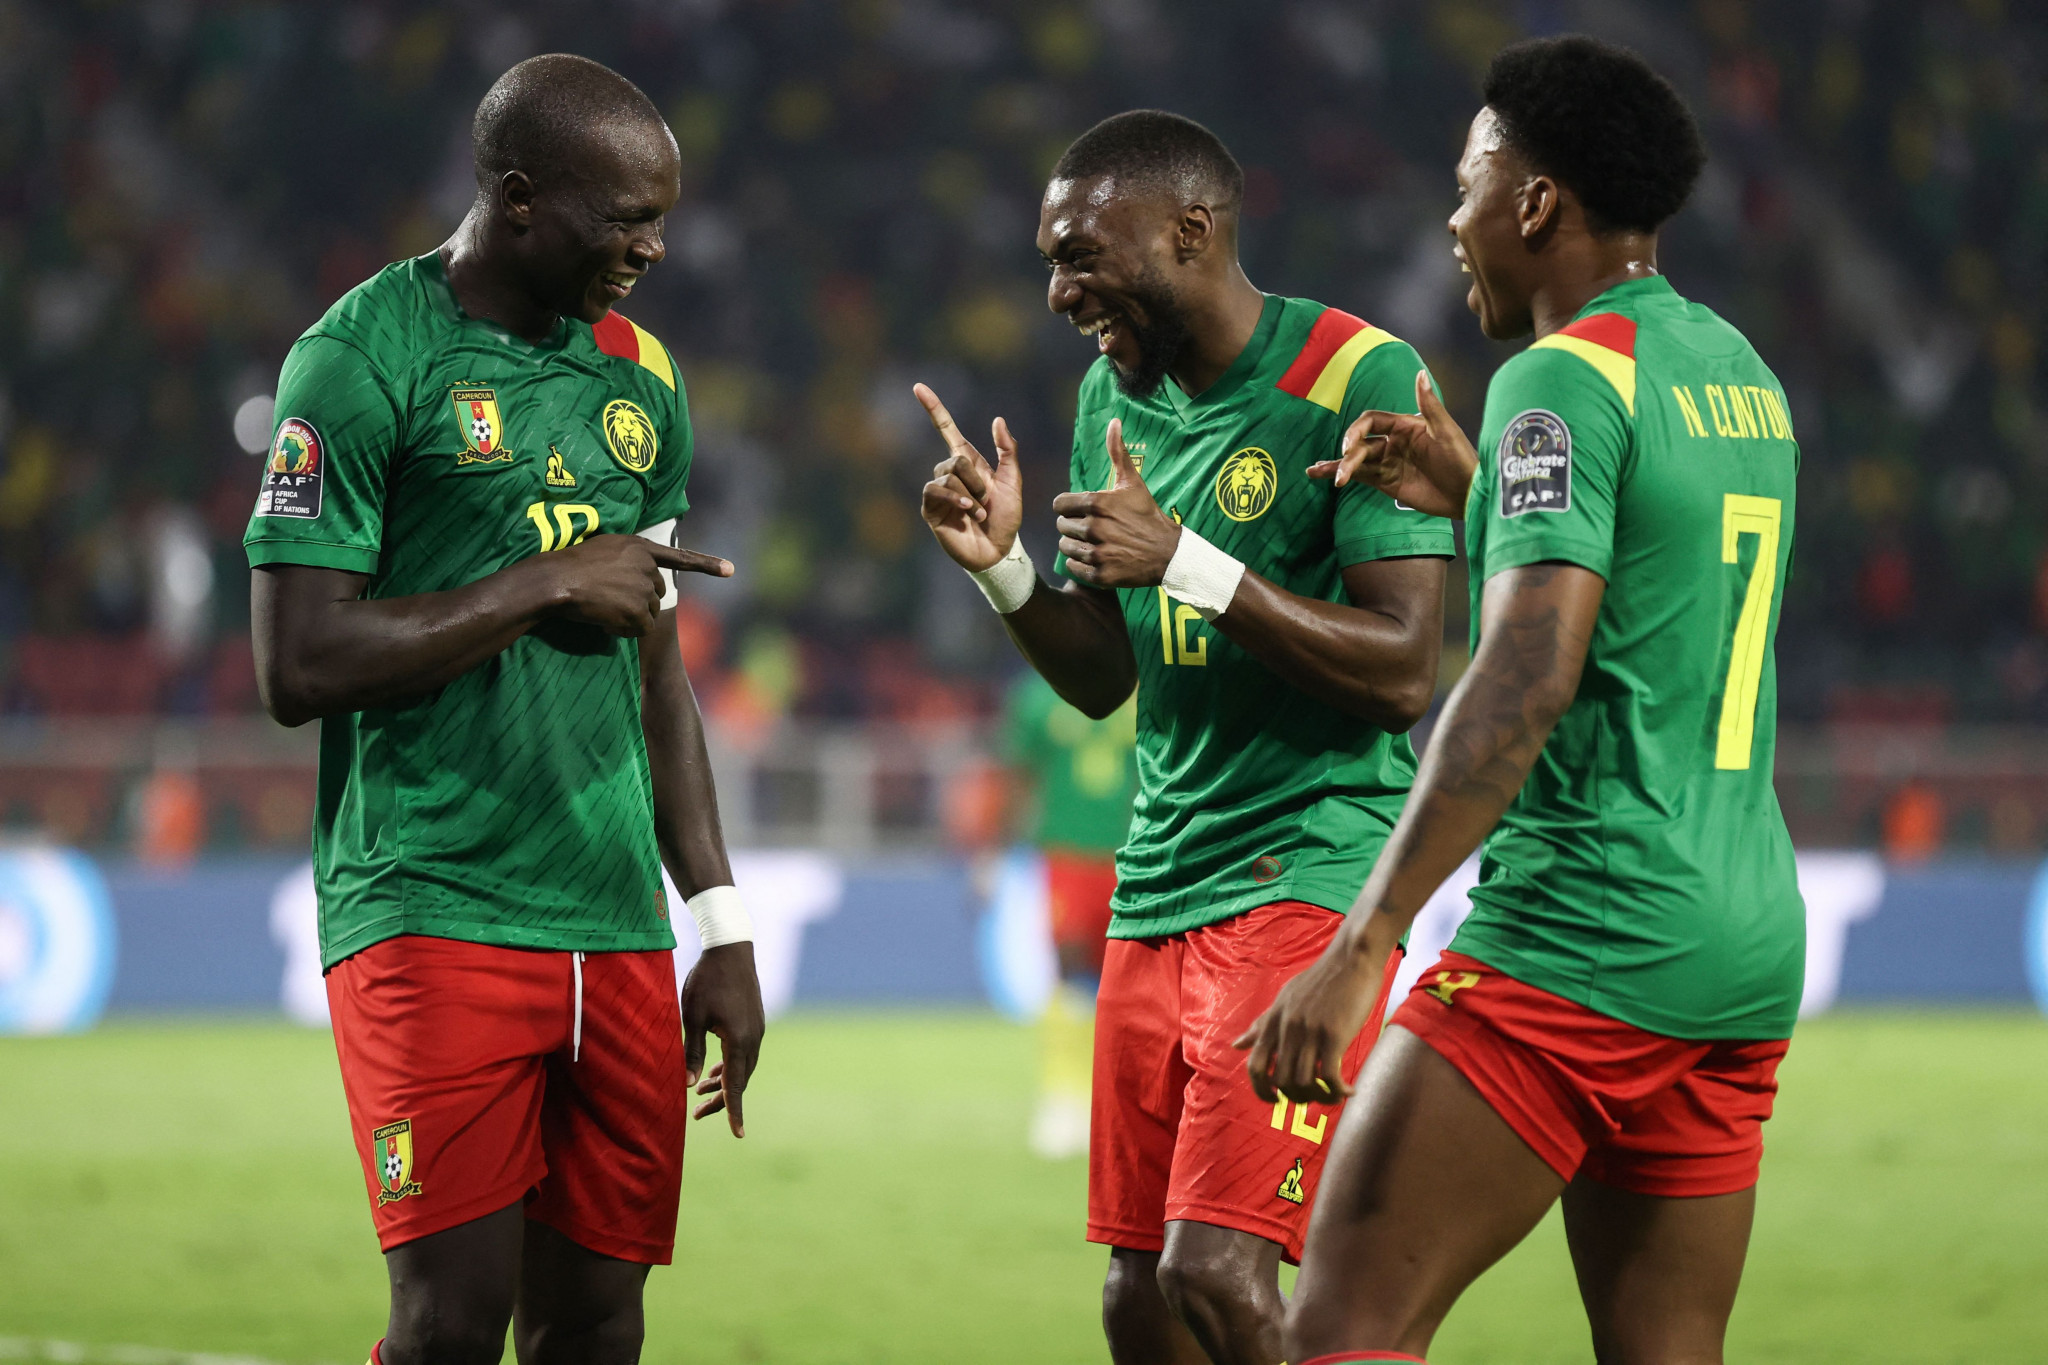 Cameroon sunk Comoros in nervy fashion to make it into the quarter-finals ©Getty Images